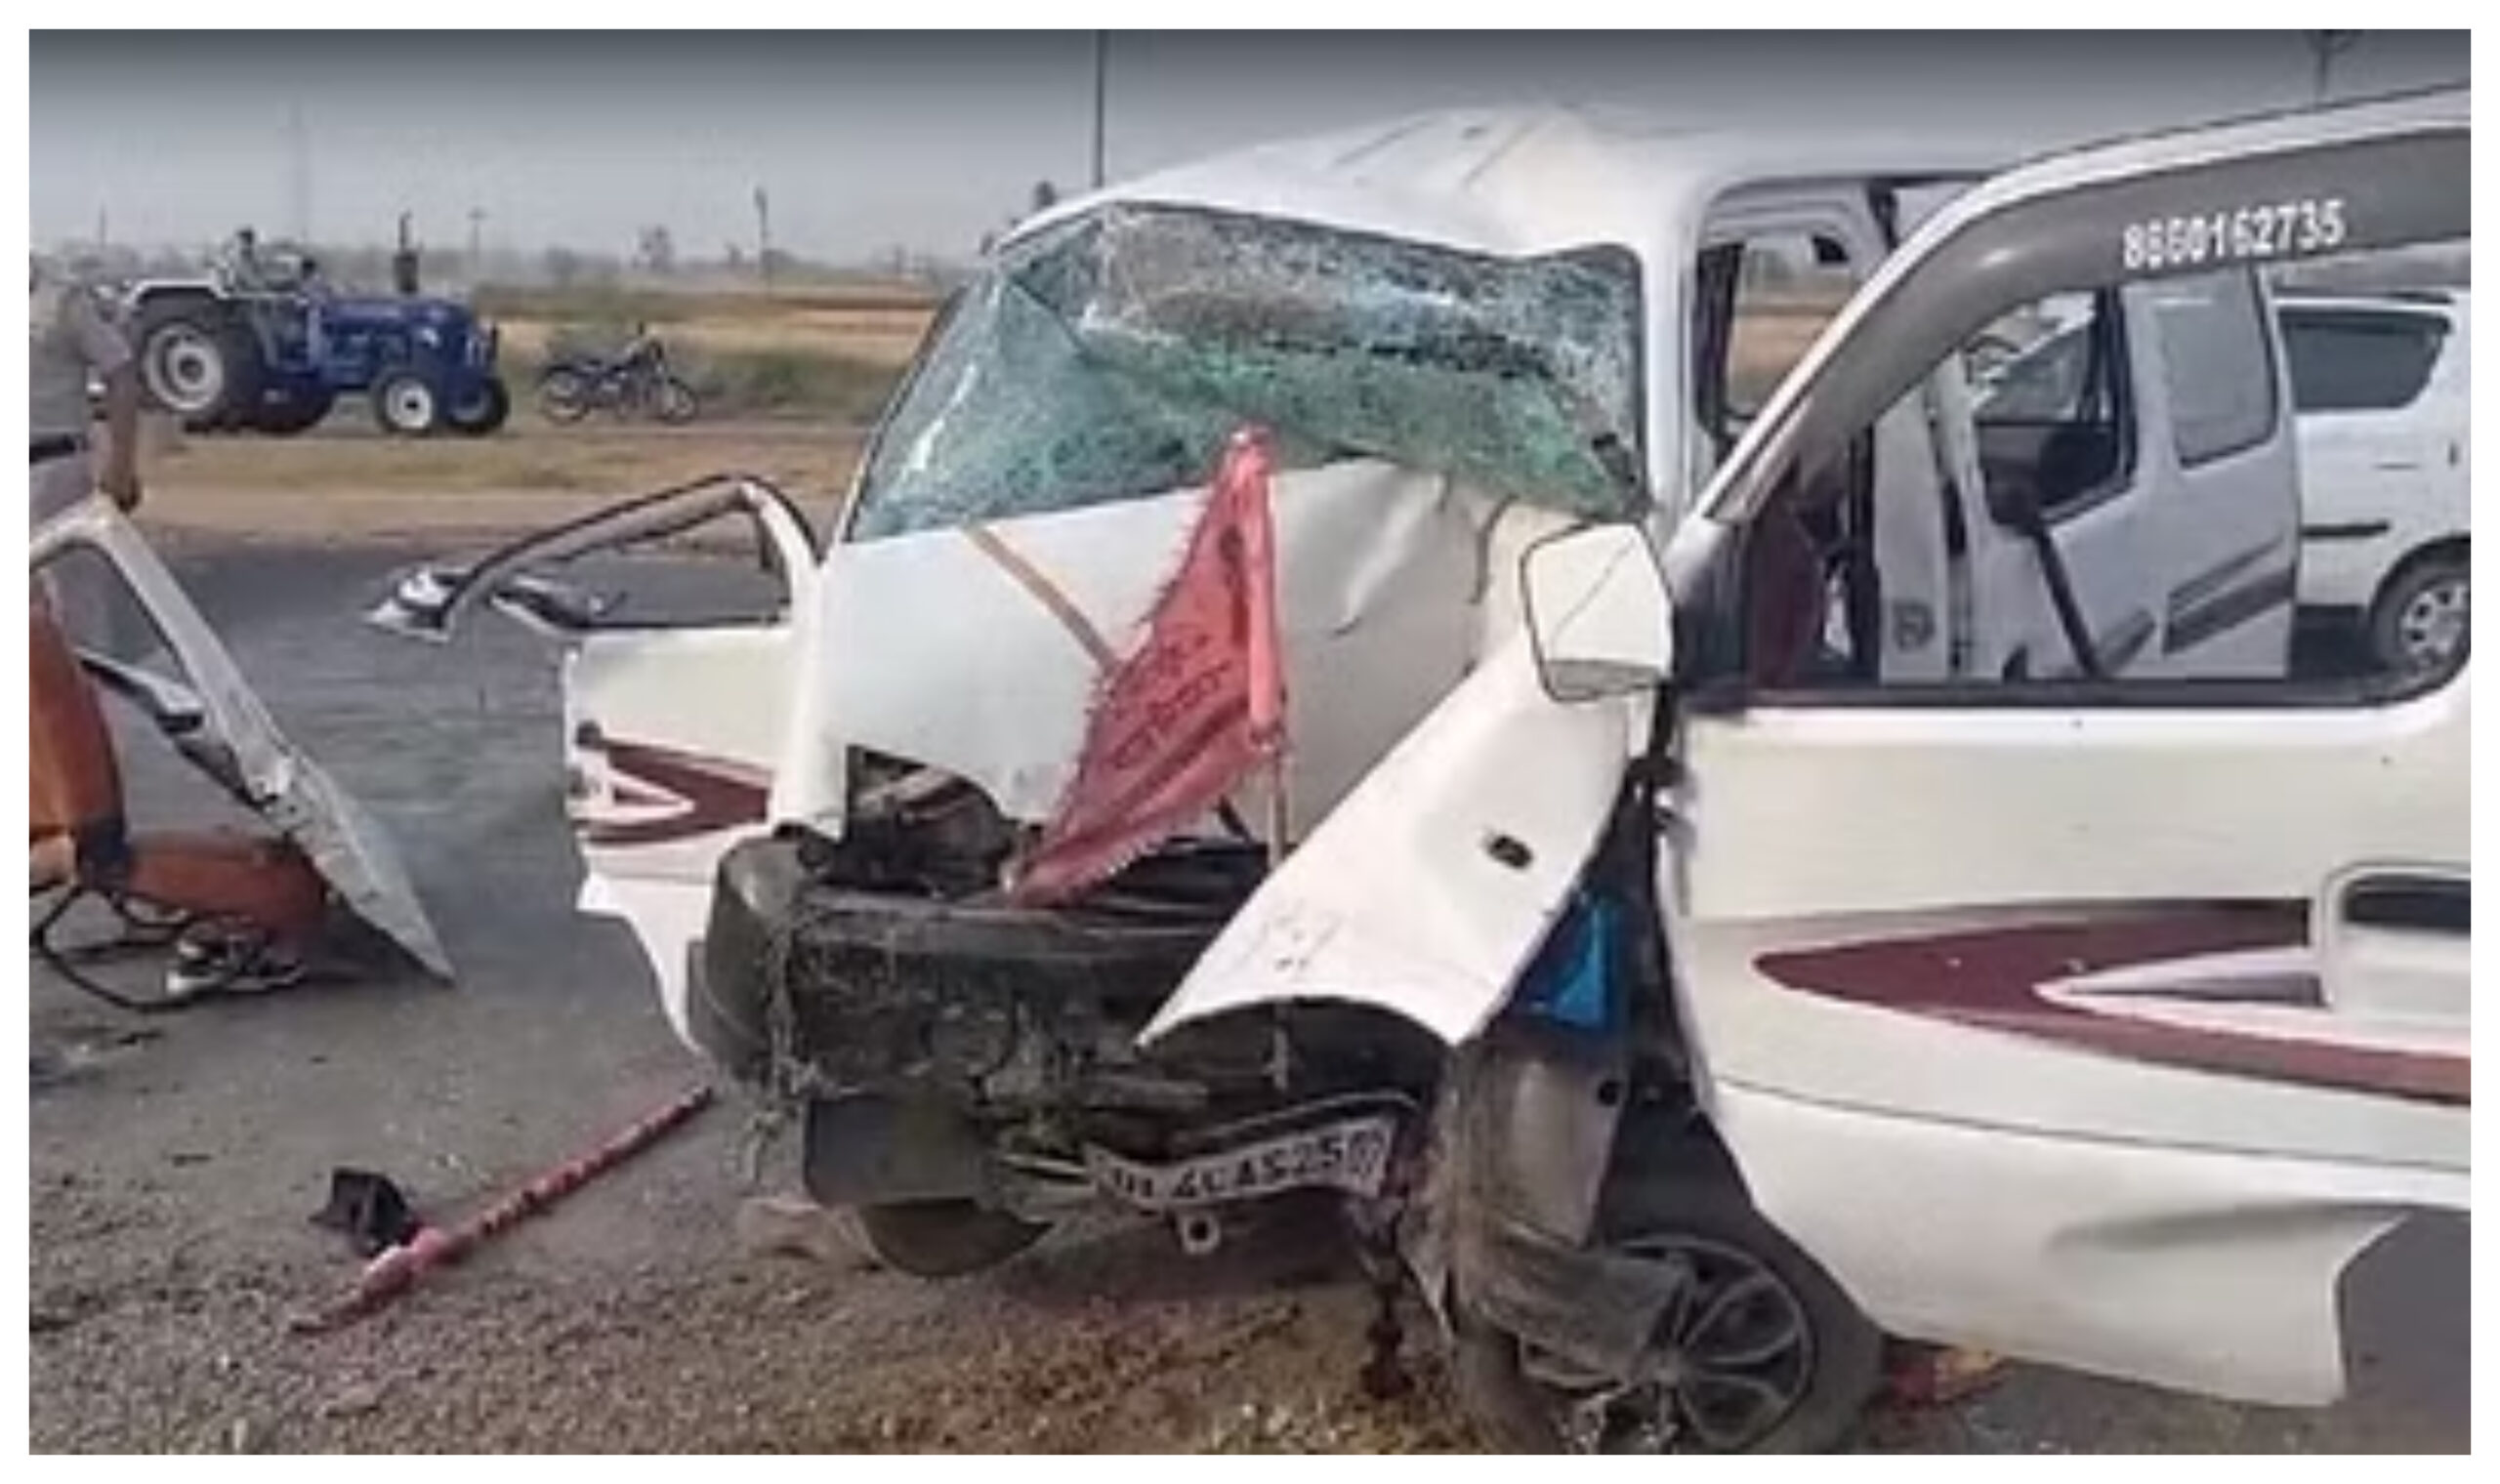 Haryana: Car accident in Sonipat, four including woman and children died, haryana aciident news in hindi